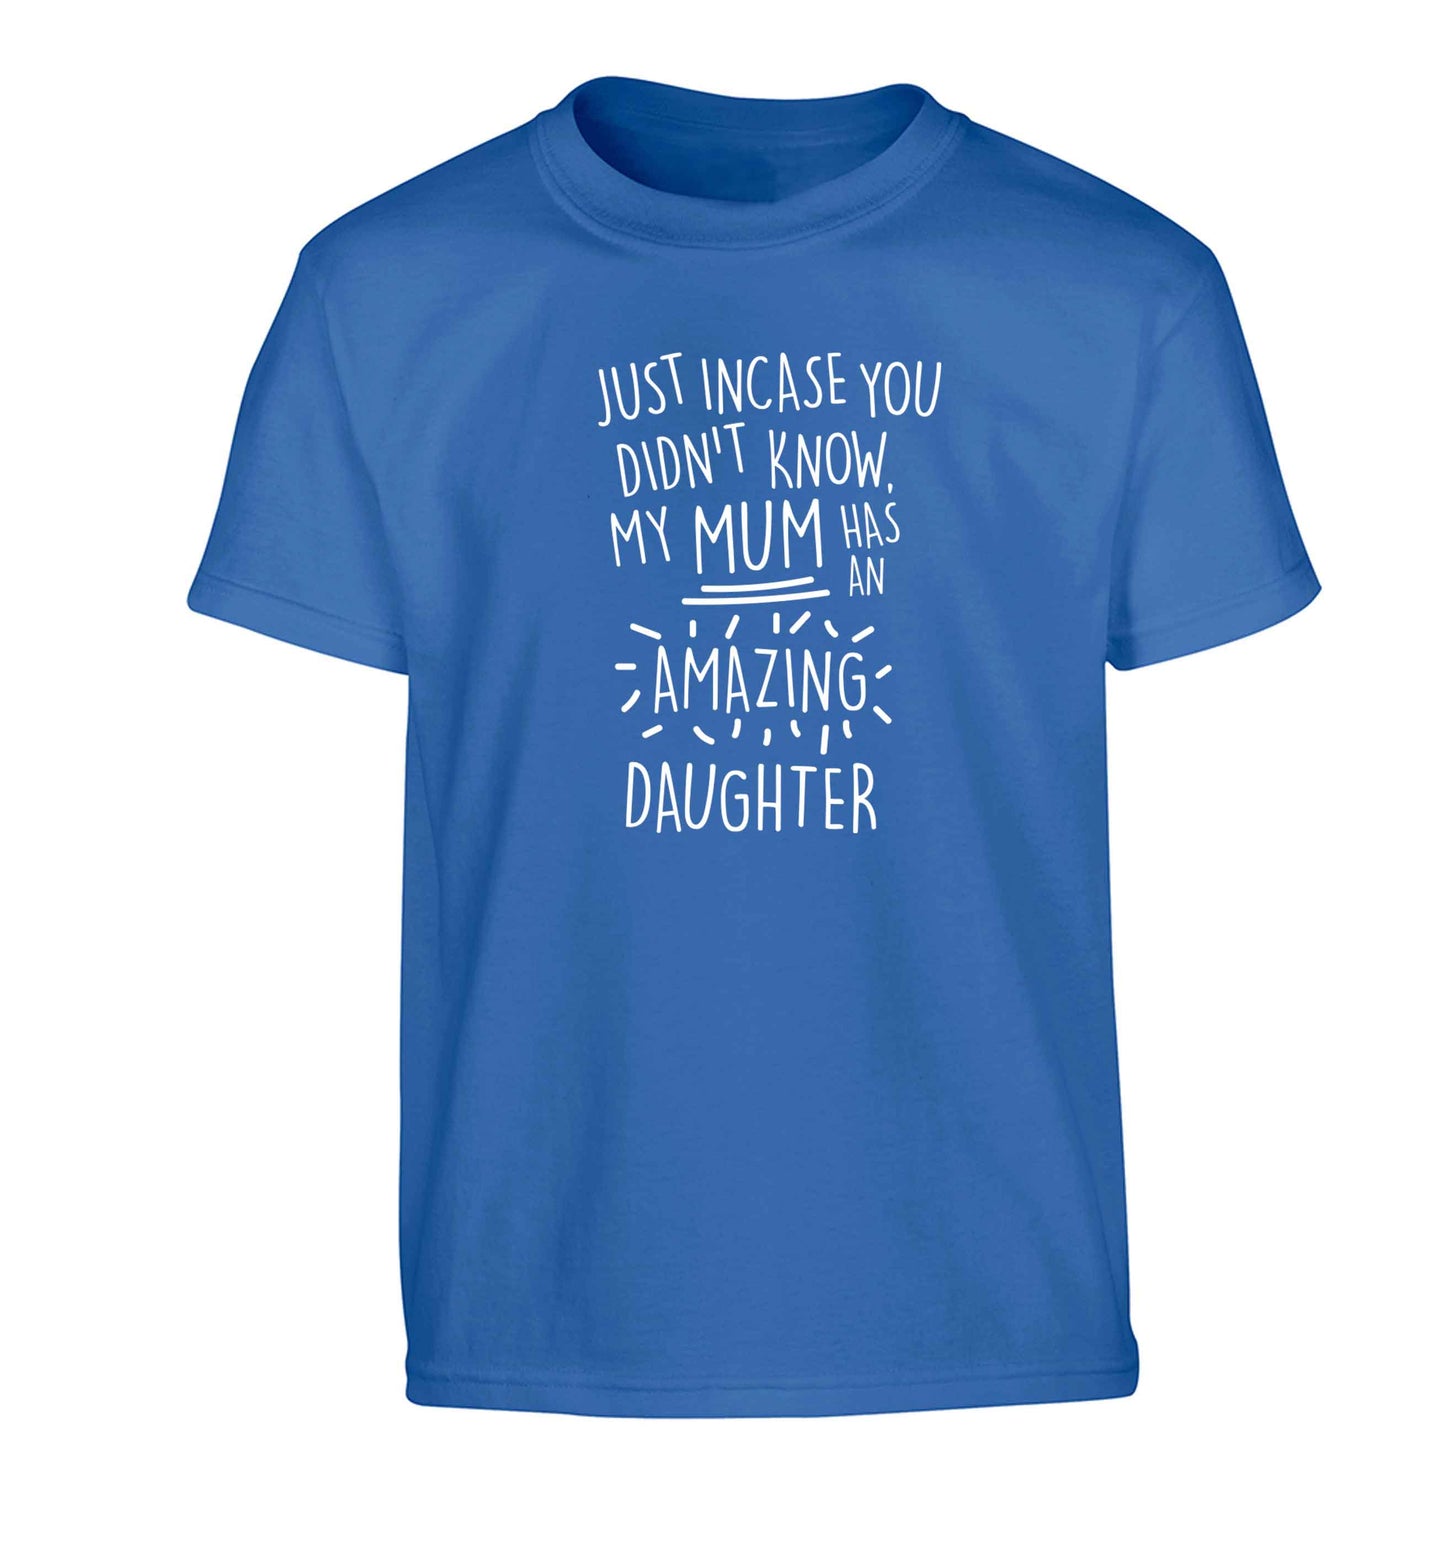 Just incase you didn't know my mum has an amazing daughter Children's blue Tshirt 12-13 Years